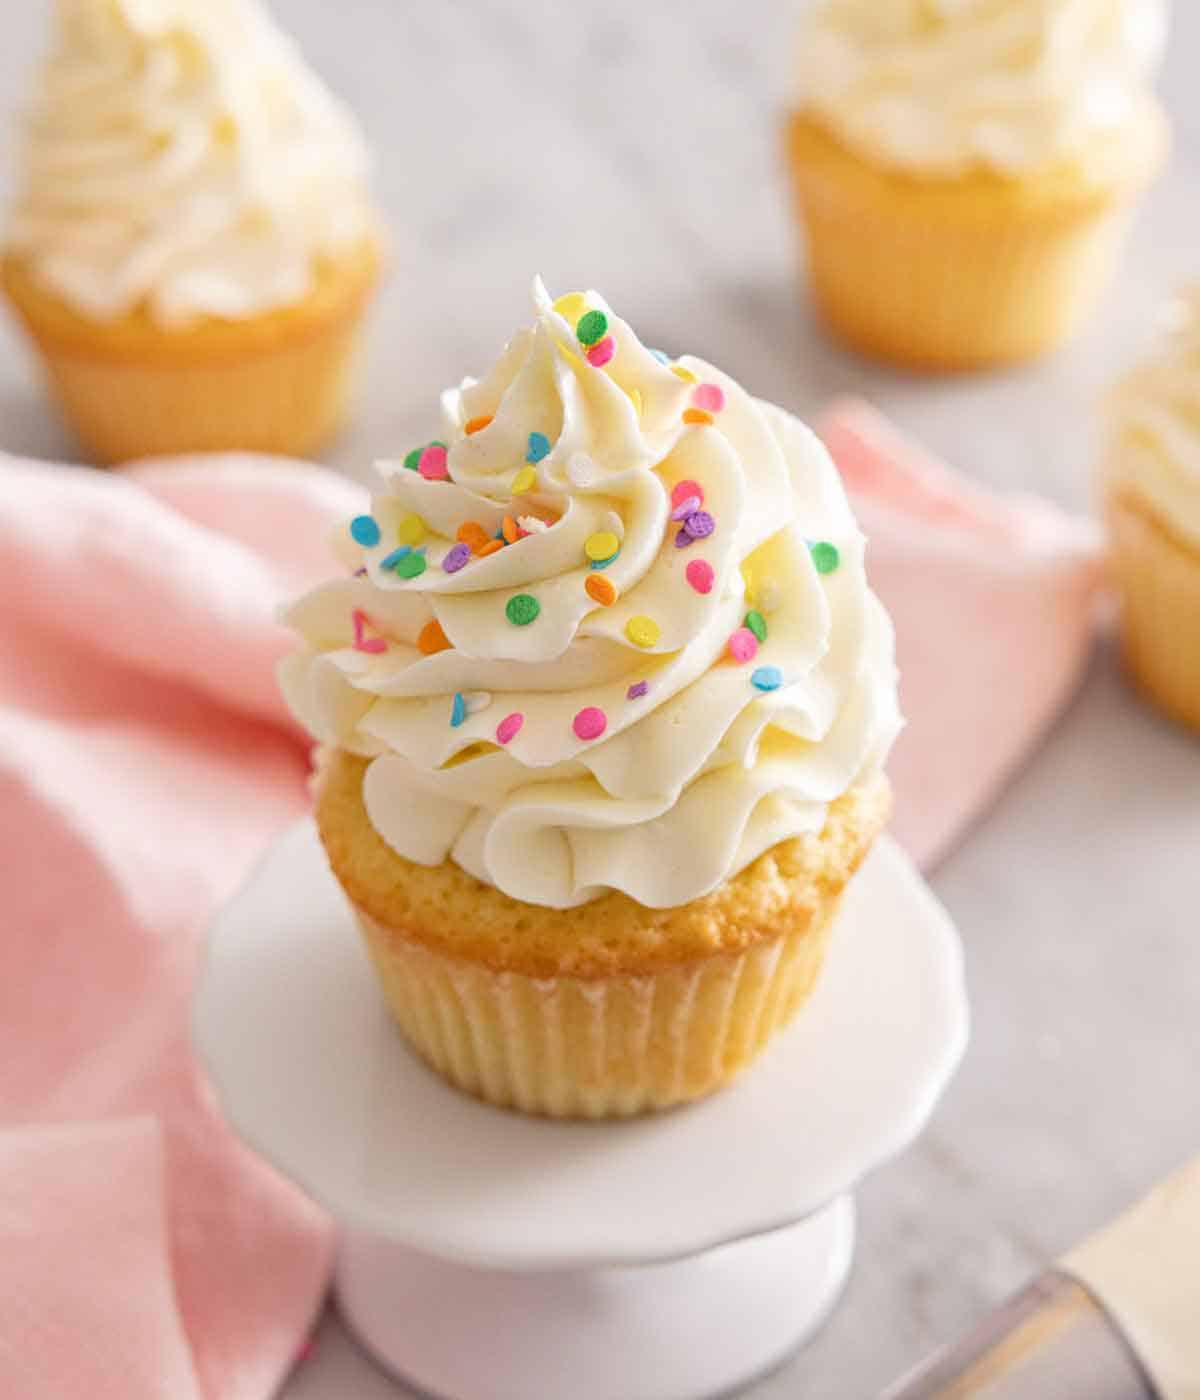 A vanilla cupcake with Swiss meringue buttercream and sprinkles on top.